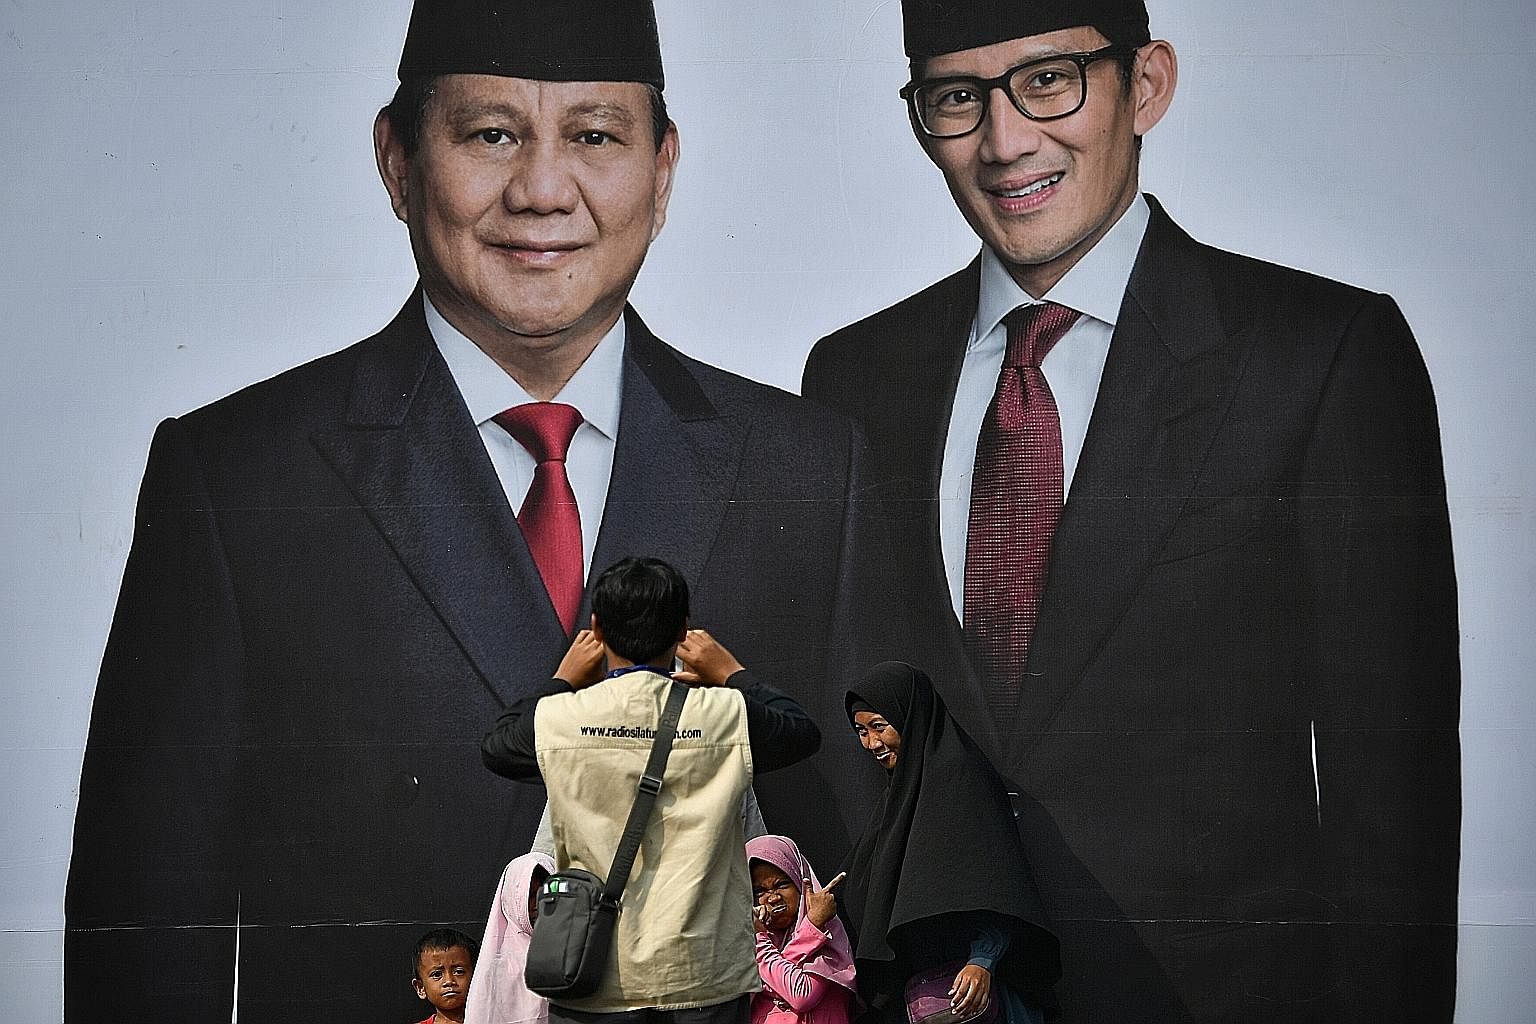 Supporters of presidential hopeful Prabowo Subianto taking pictures in front of a poster of him (left) and his running mate Sandiaga Uno at the Gelora Bung Karno Stadium yesterday, a day ahead of his mega rally there.